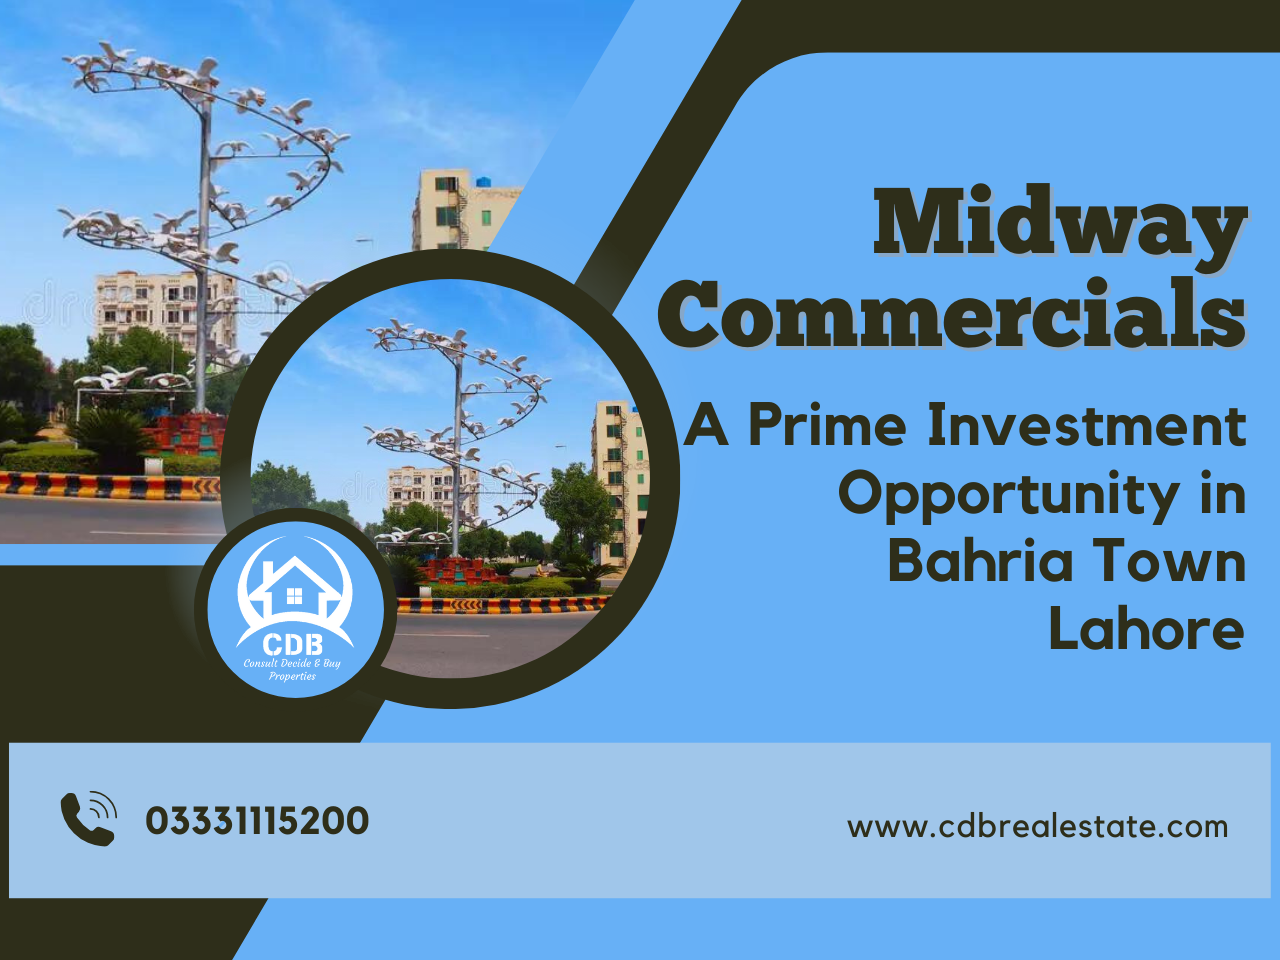 Midway Commercials: A Prime Investment Opportunity in Bahria Town Lahore